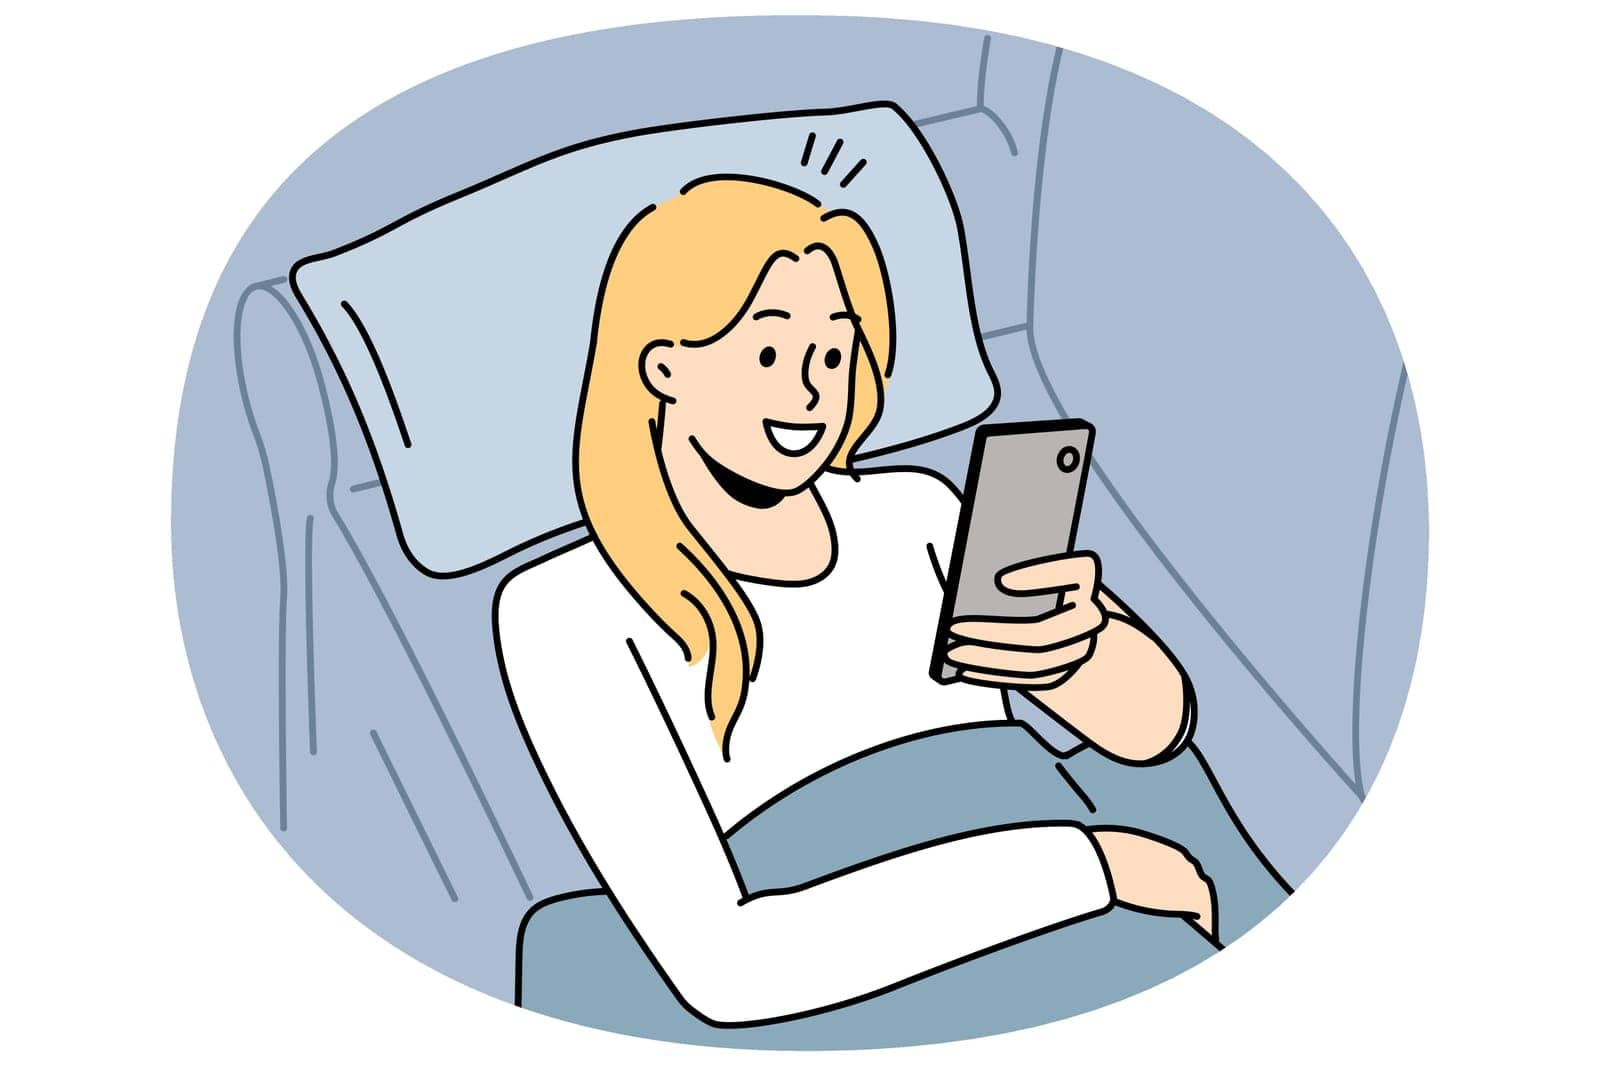 Happy girl lying on couch using cellphone texting or messaging. Smiling young woman relax on sofa at home browse internet on smartphone. Vector illustration.